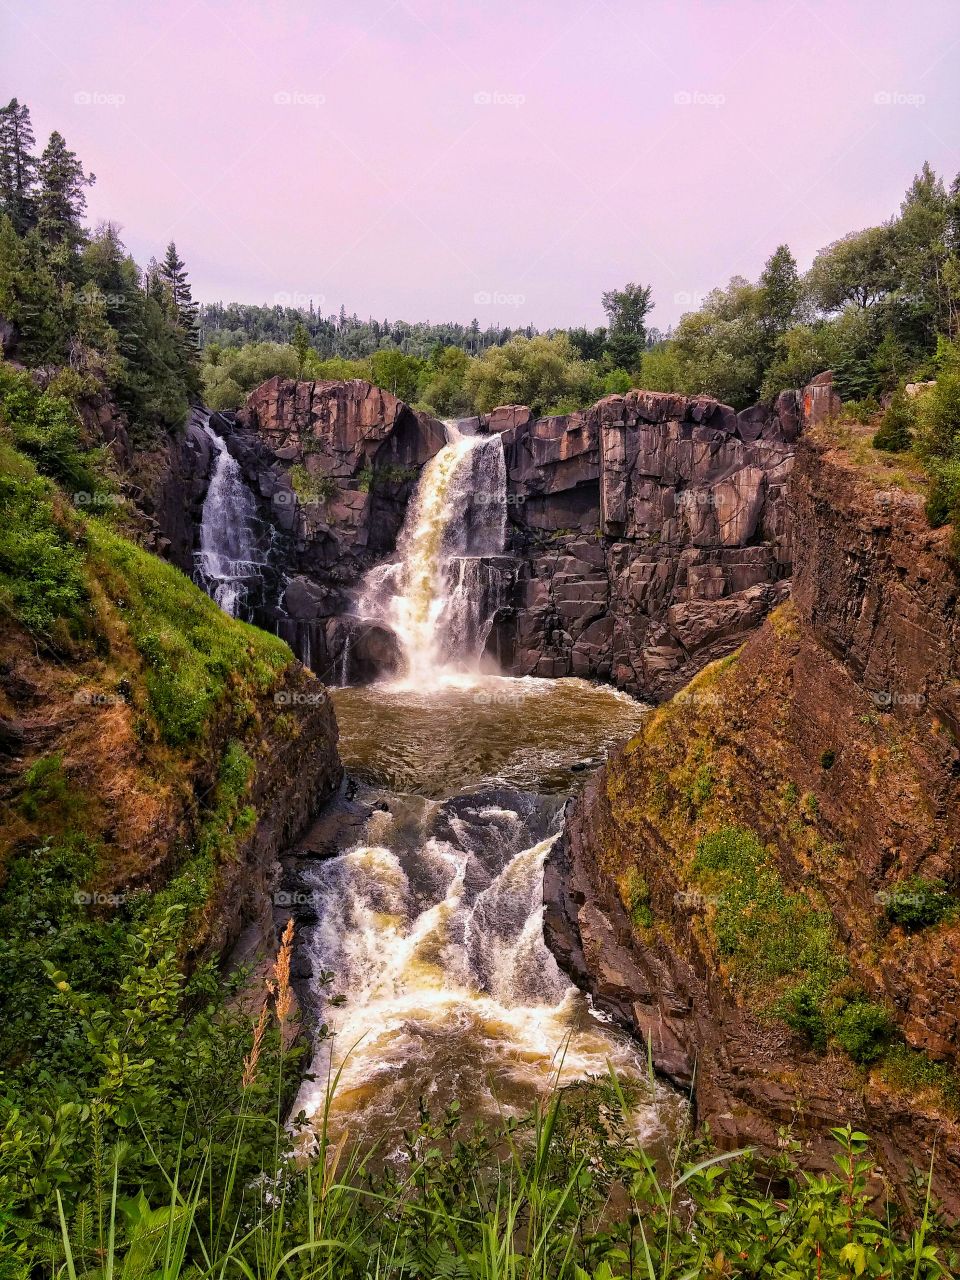 Waterfall on the Border of Minnesota and Canada. A wonderful place to photograph. The amount of Water flowing often changes. Flow of water can range from a slow trickle to water running down all sides.